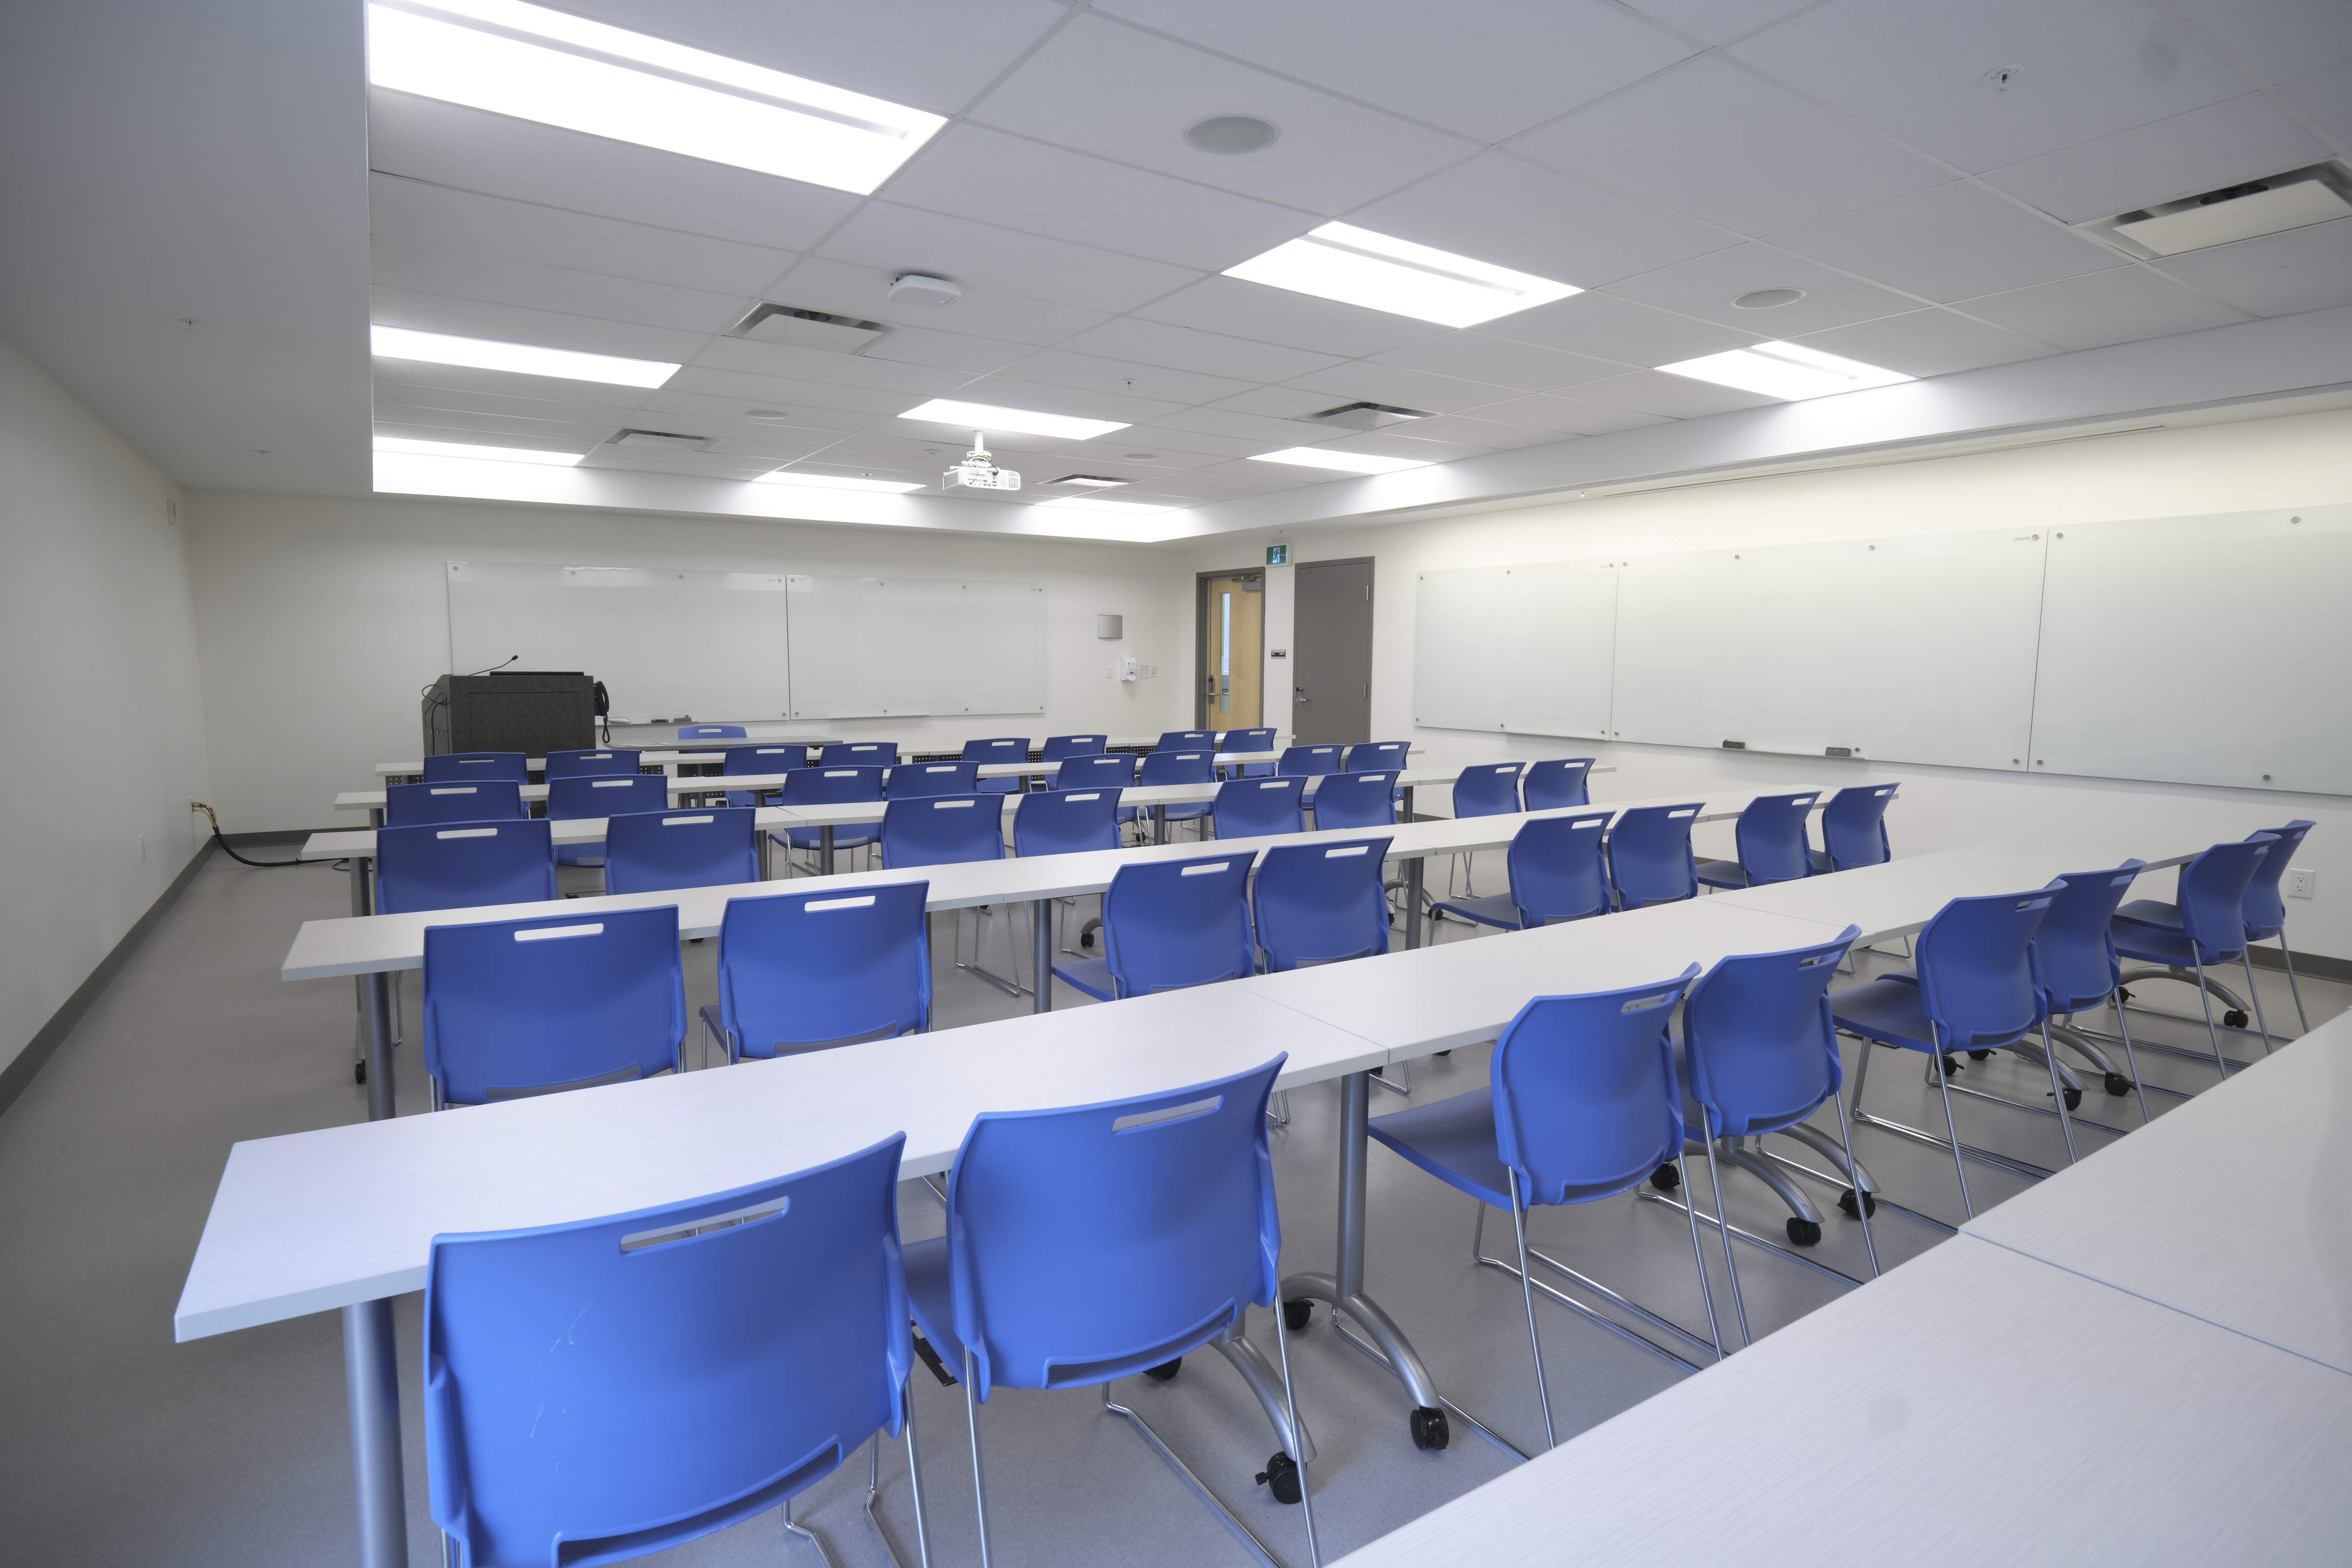 A room with rows of tables and chairs with a lectern at the front and whiteboards along the front and side wall.